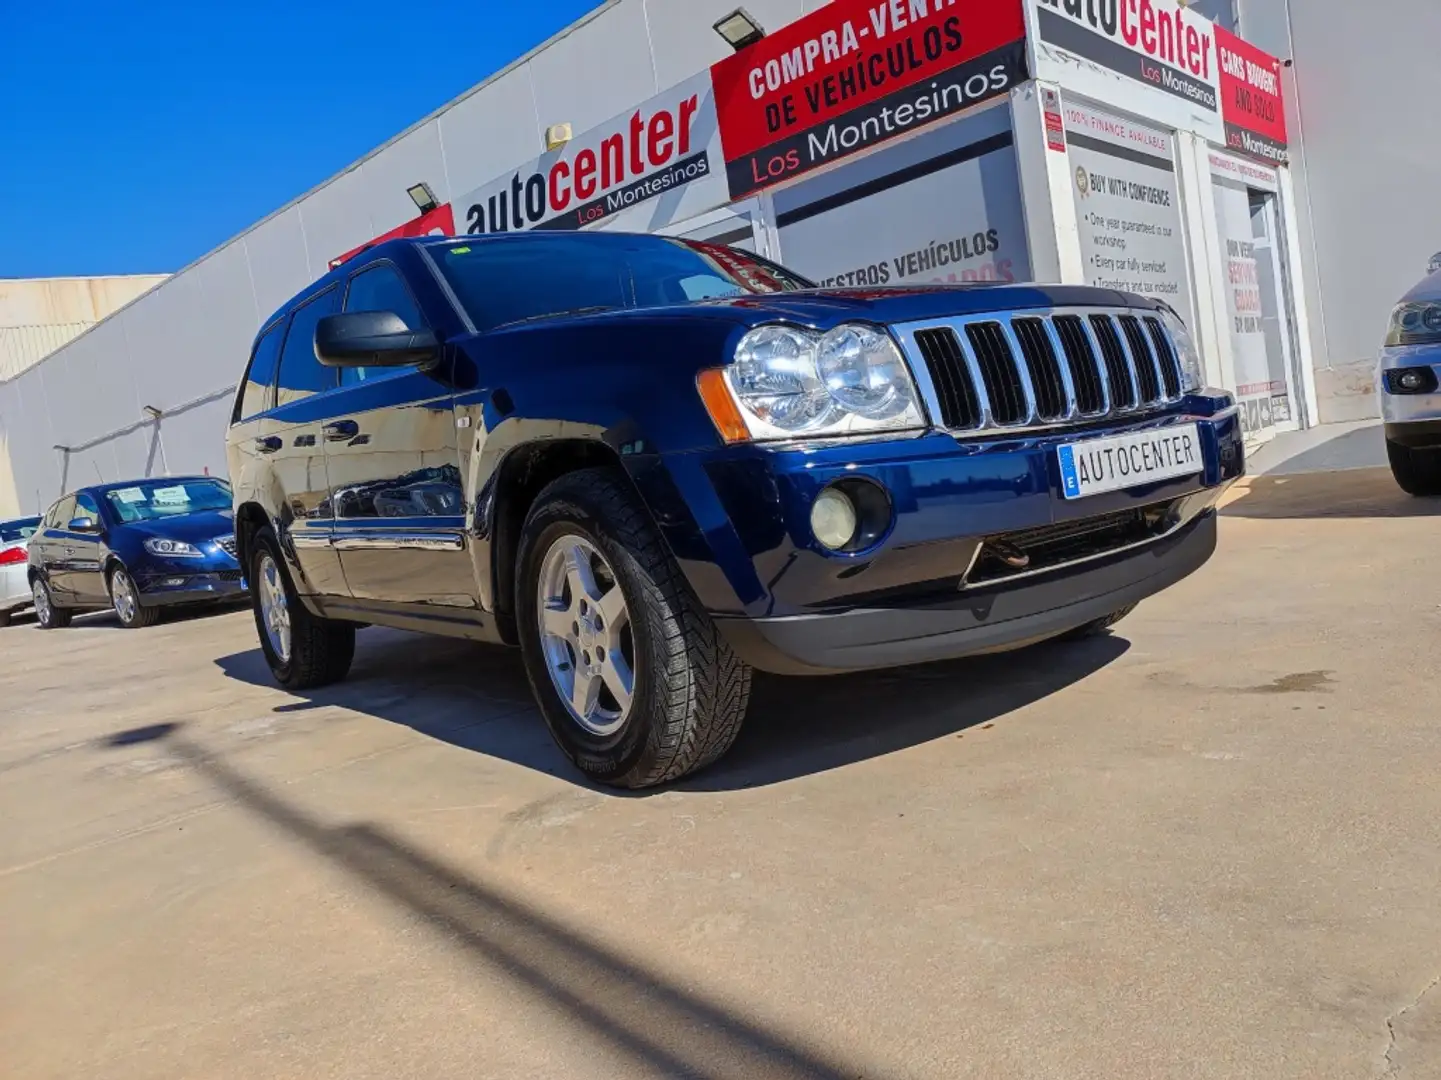 Jeep Grand Cherokee 3.0CRD V6 Limited Aut. Blauw - 1